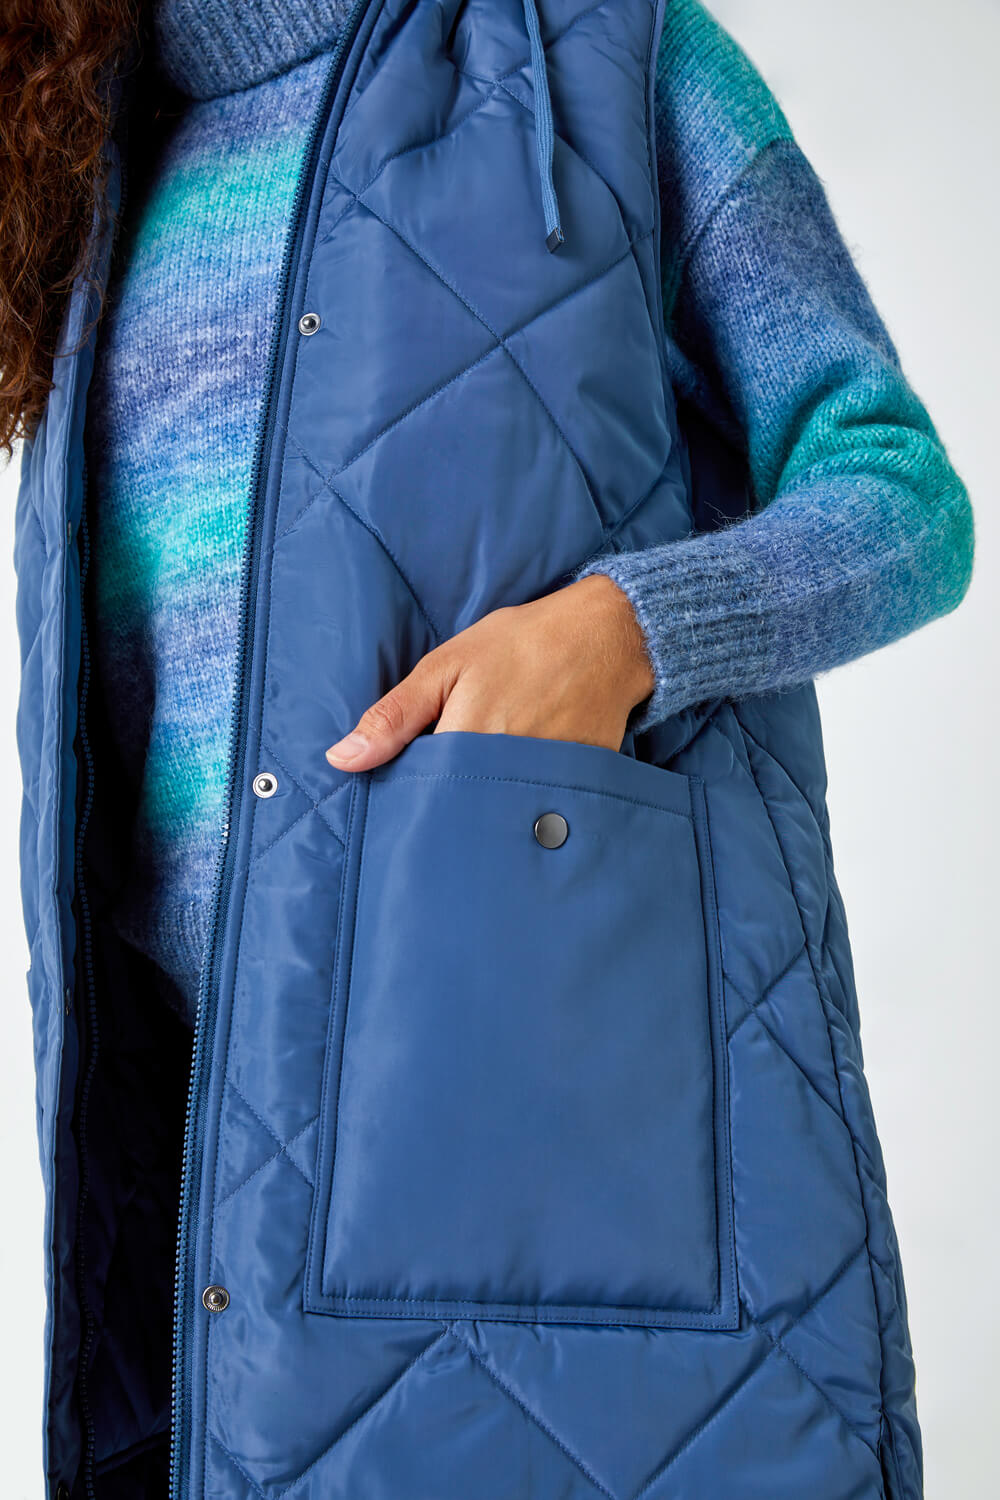 Steel Blue Diamond Quilted Longline Gilet, Image 4 of 4